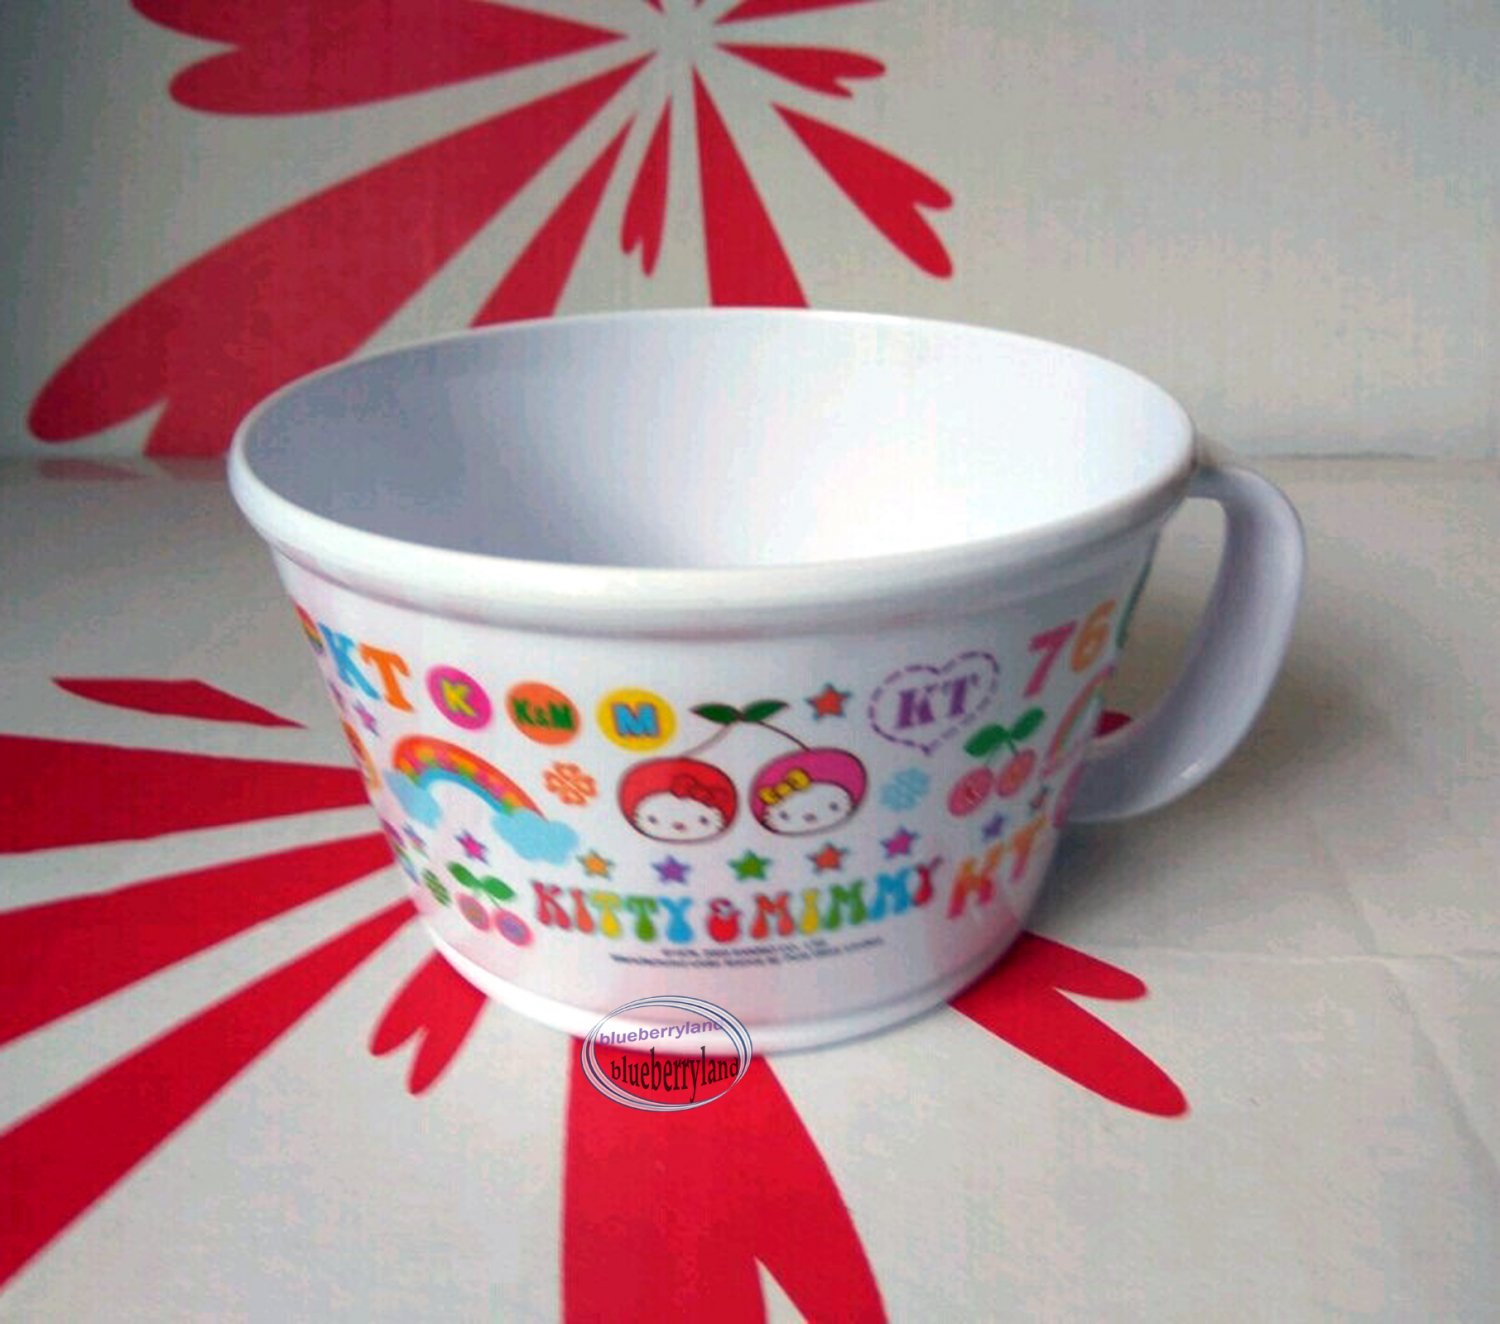 Sanrio Hello Kitty Big Bowl with handle set meal noodle soup container